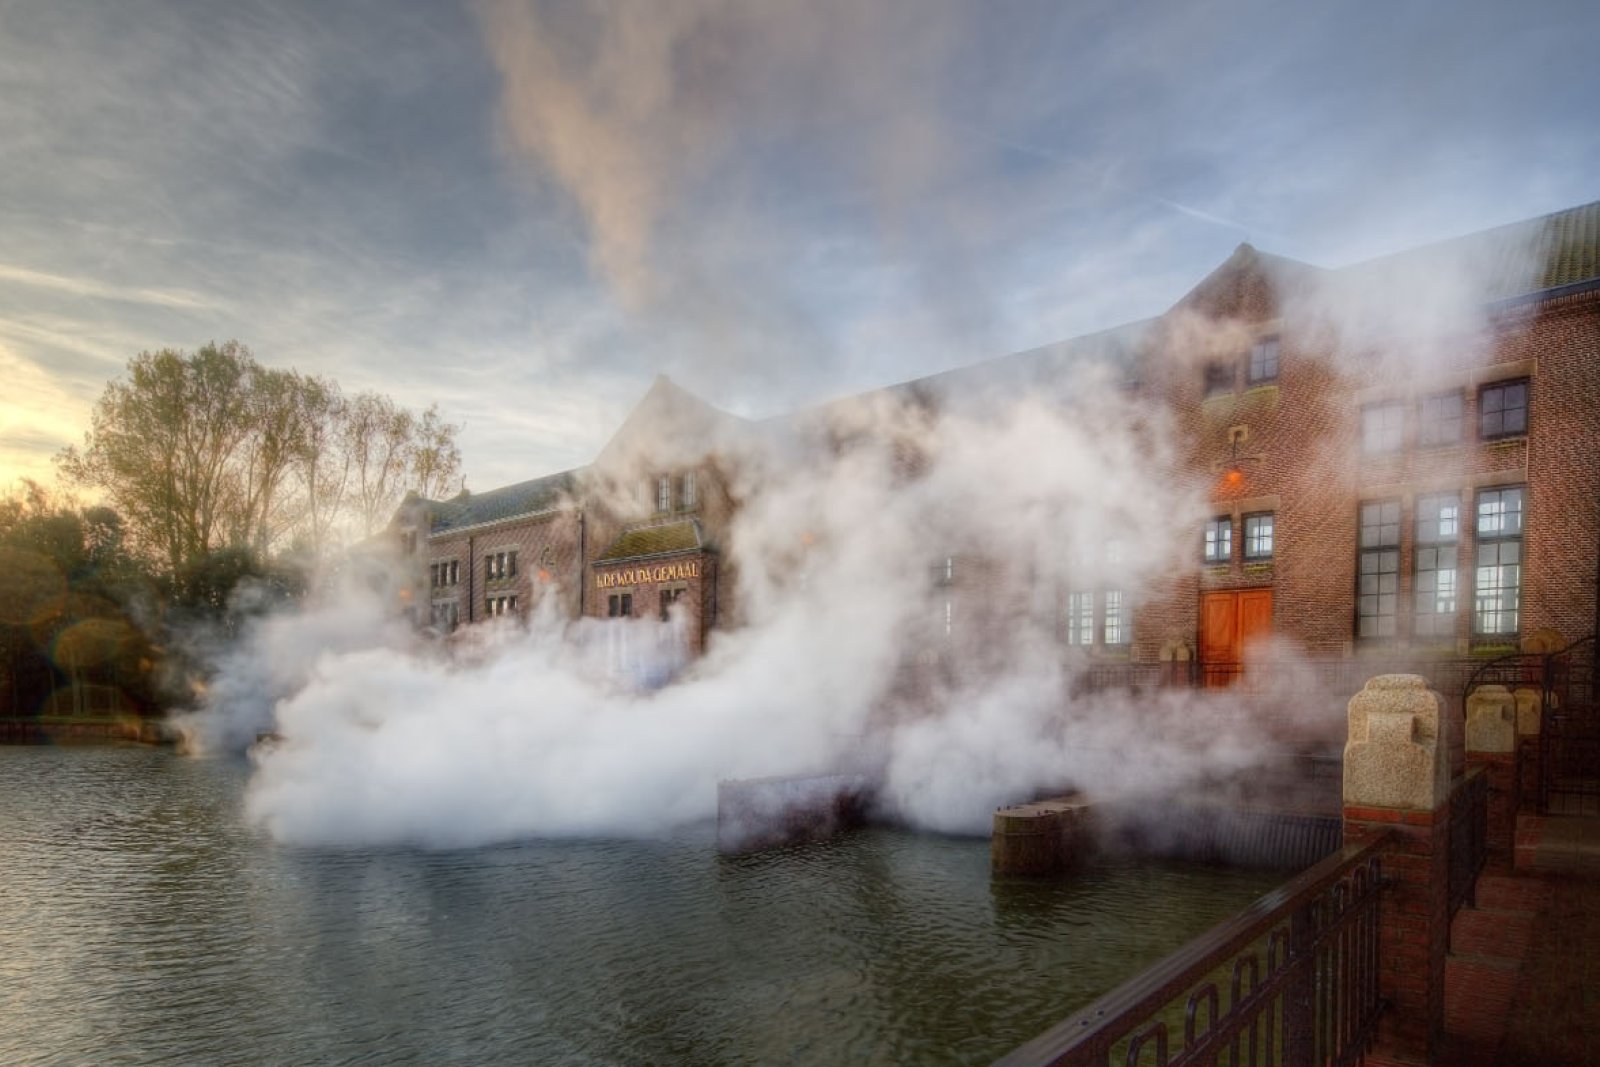 Woudagemaal pumping station with steam coming out of the building